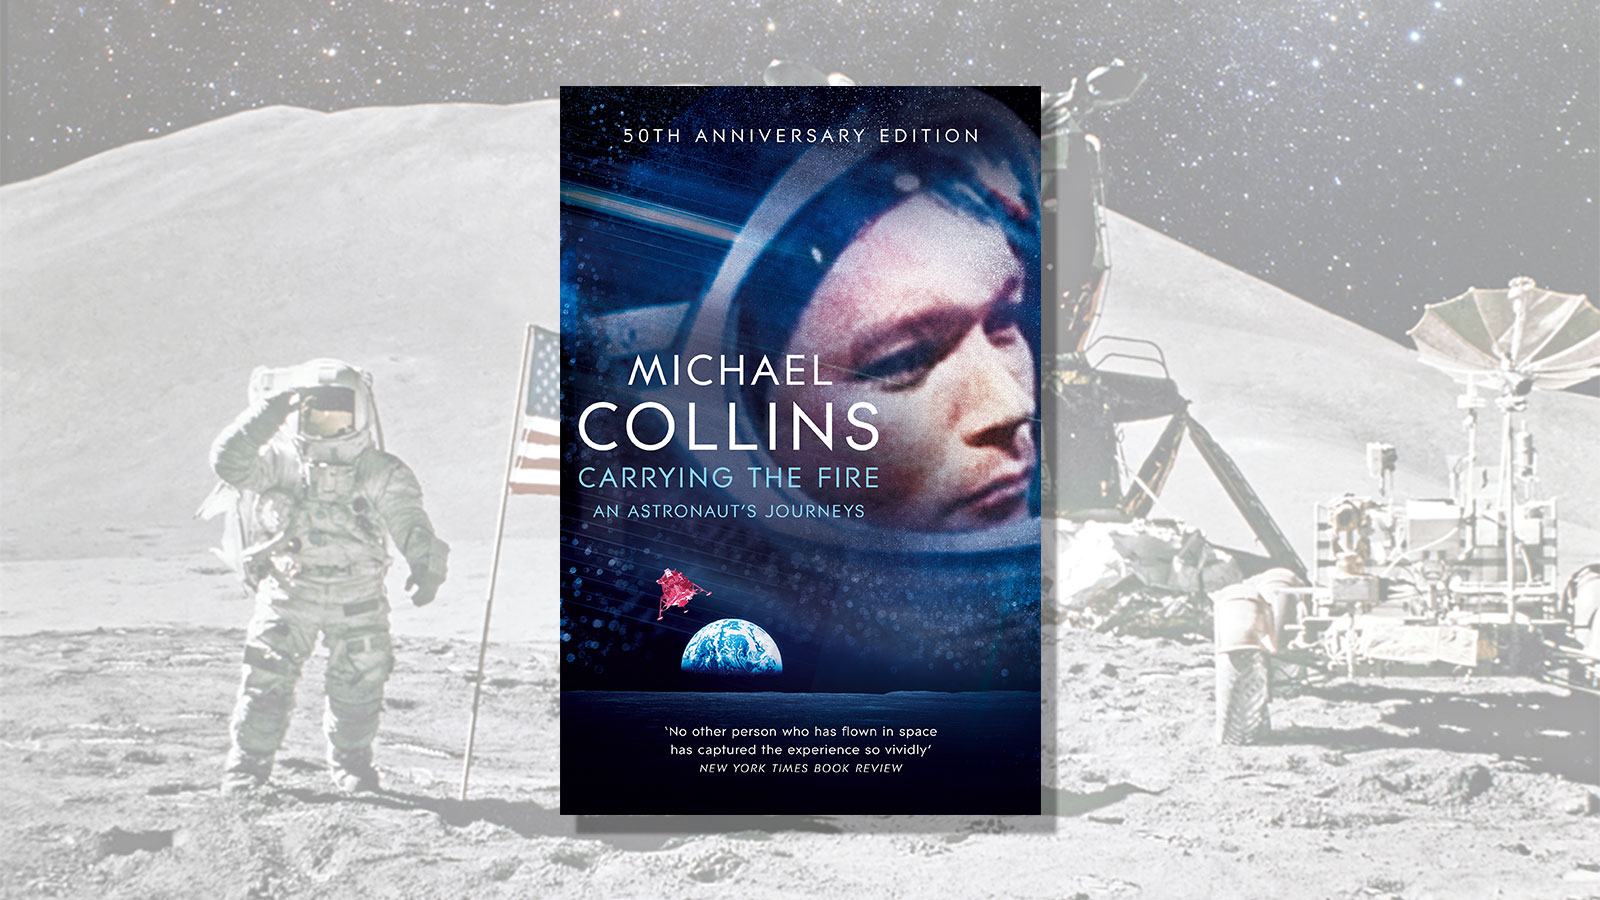 Image of the books cover for Michael Collins against a faded image of the moon landing